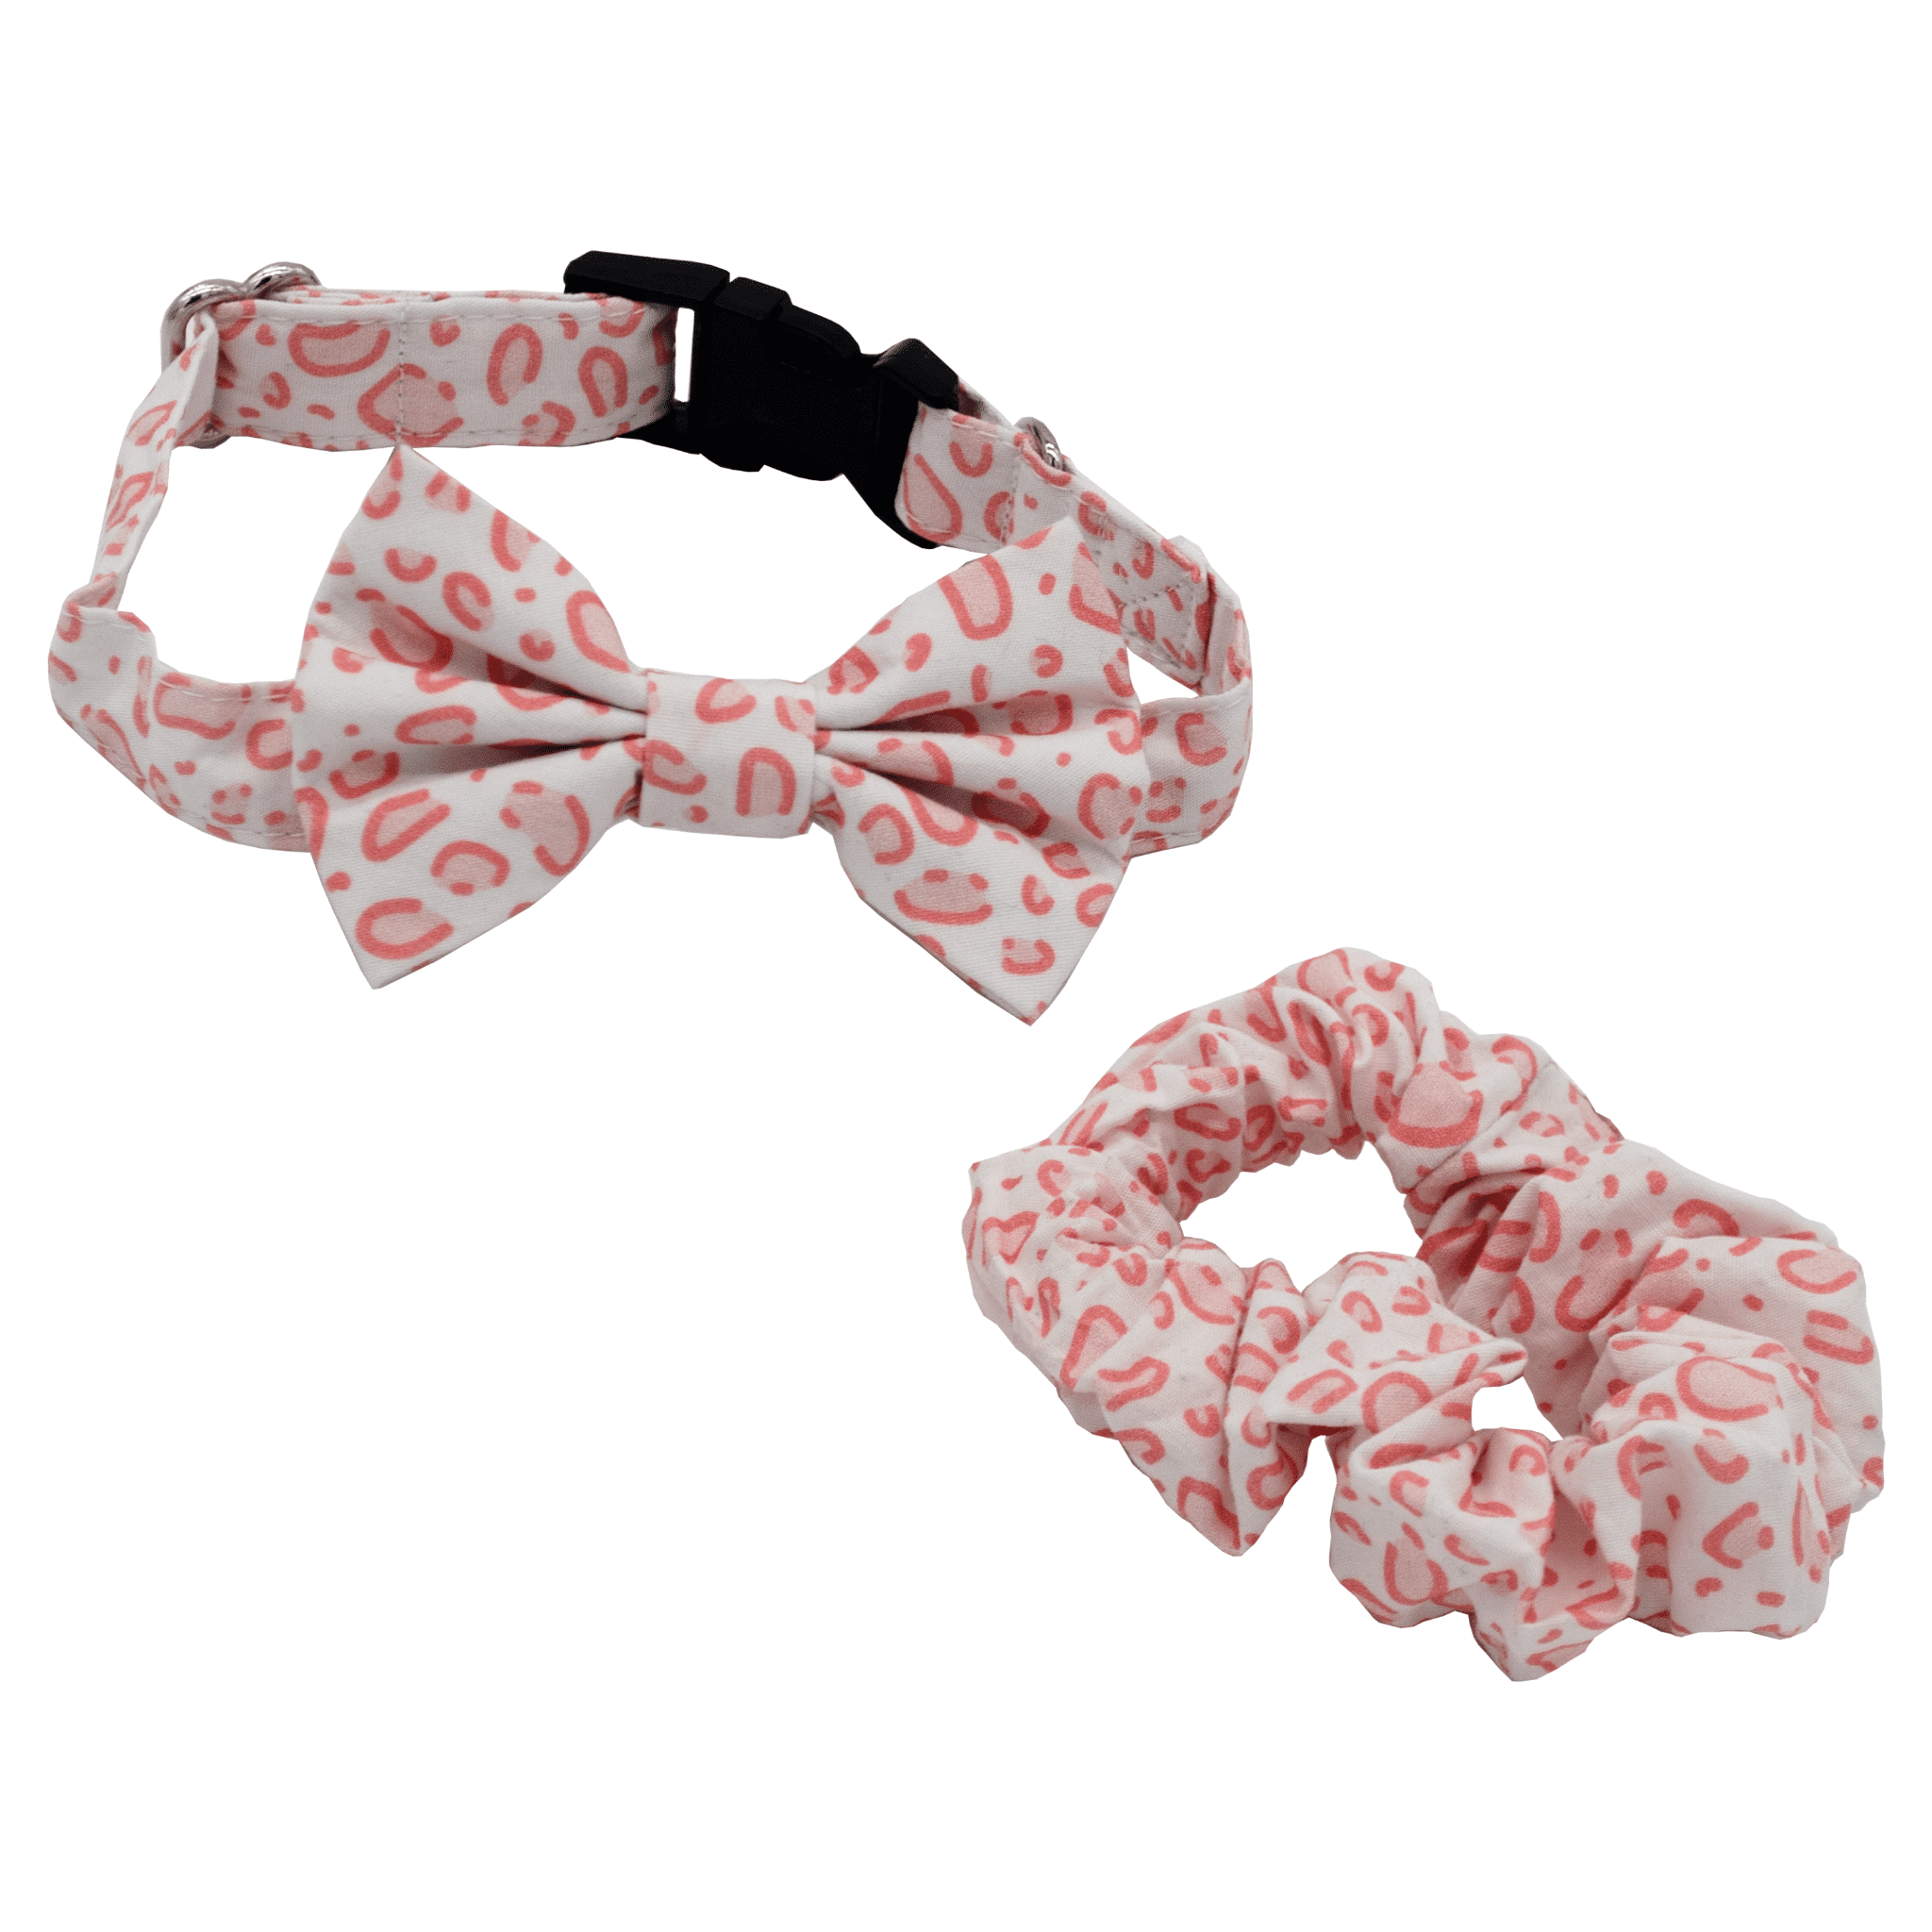 Sailor Bow Bow Tie The Way Snap-In Dog Bows\u00ae Bow Tie Hair Bow Only The Best For Your Best Friend Cat Bow Tie Therapy Dog Bow